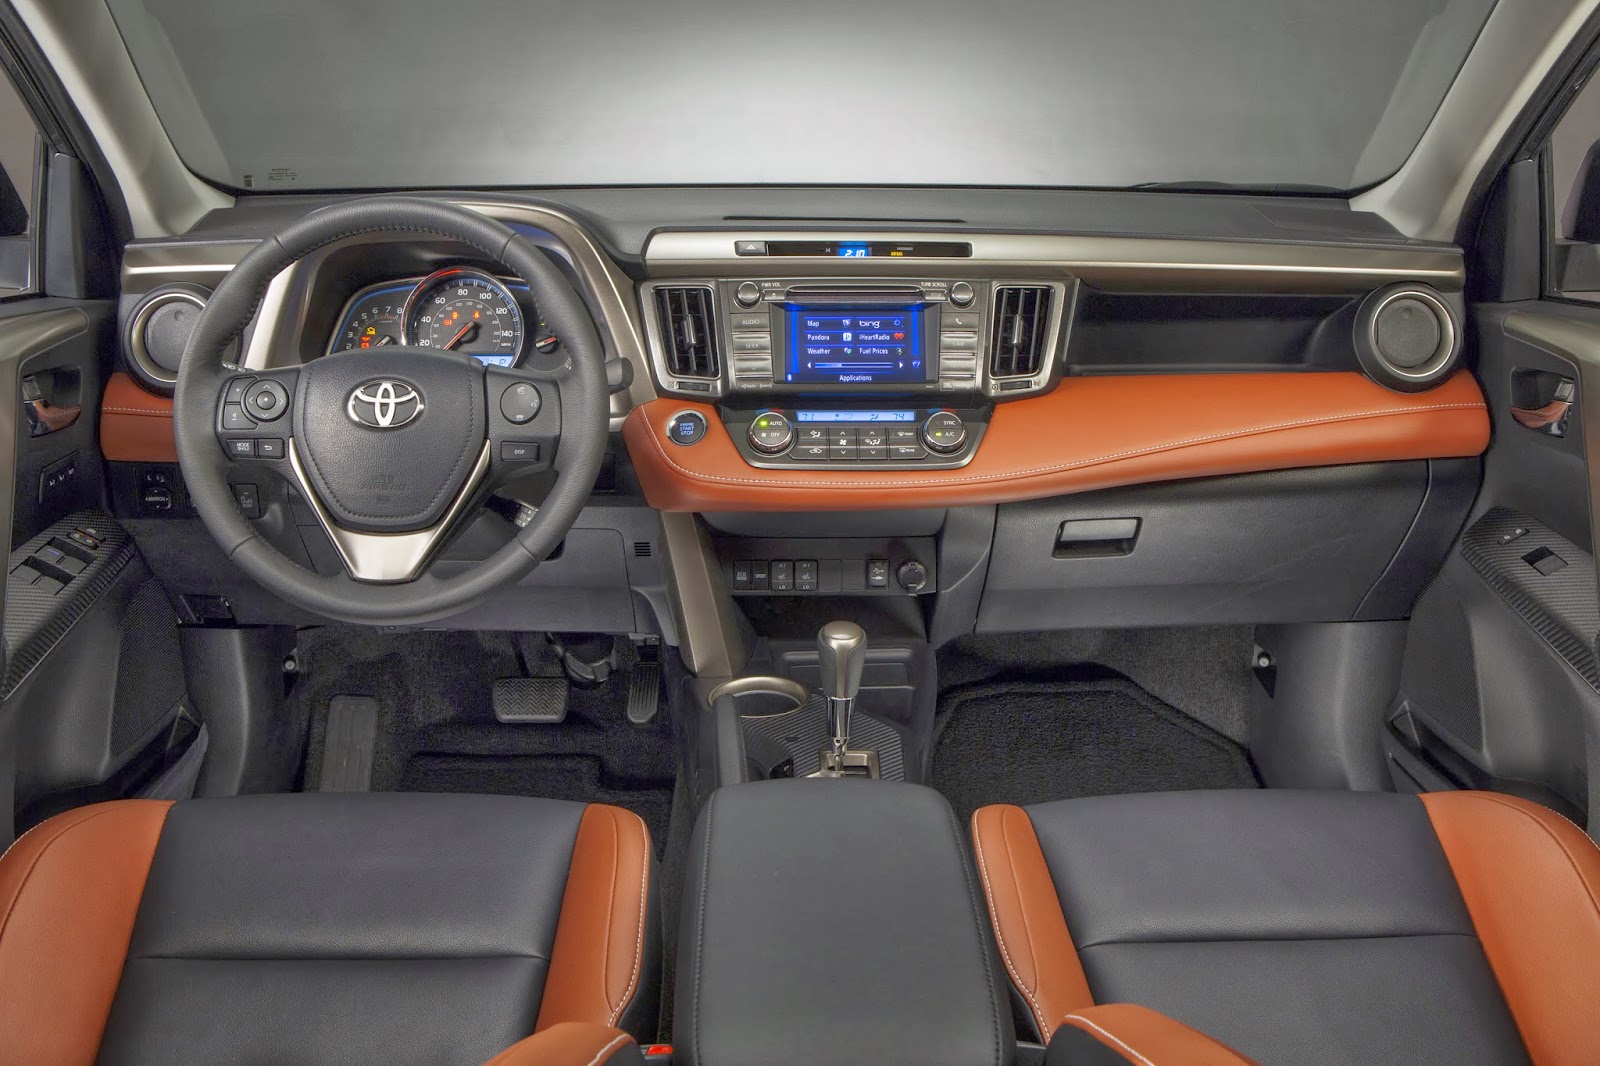 What $2,720 Extra Buys You In The Toyota RAV4 Limited (UPDATED)